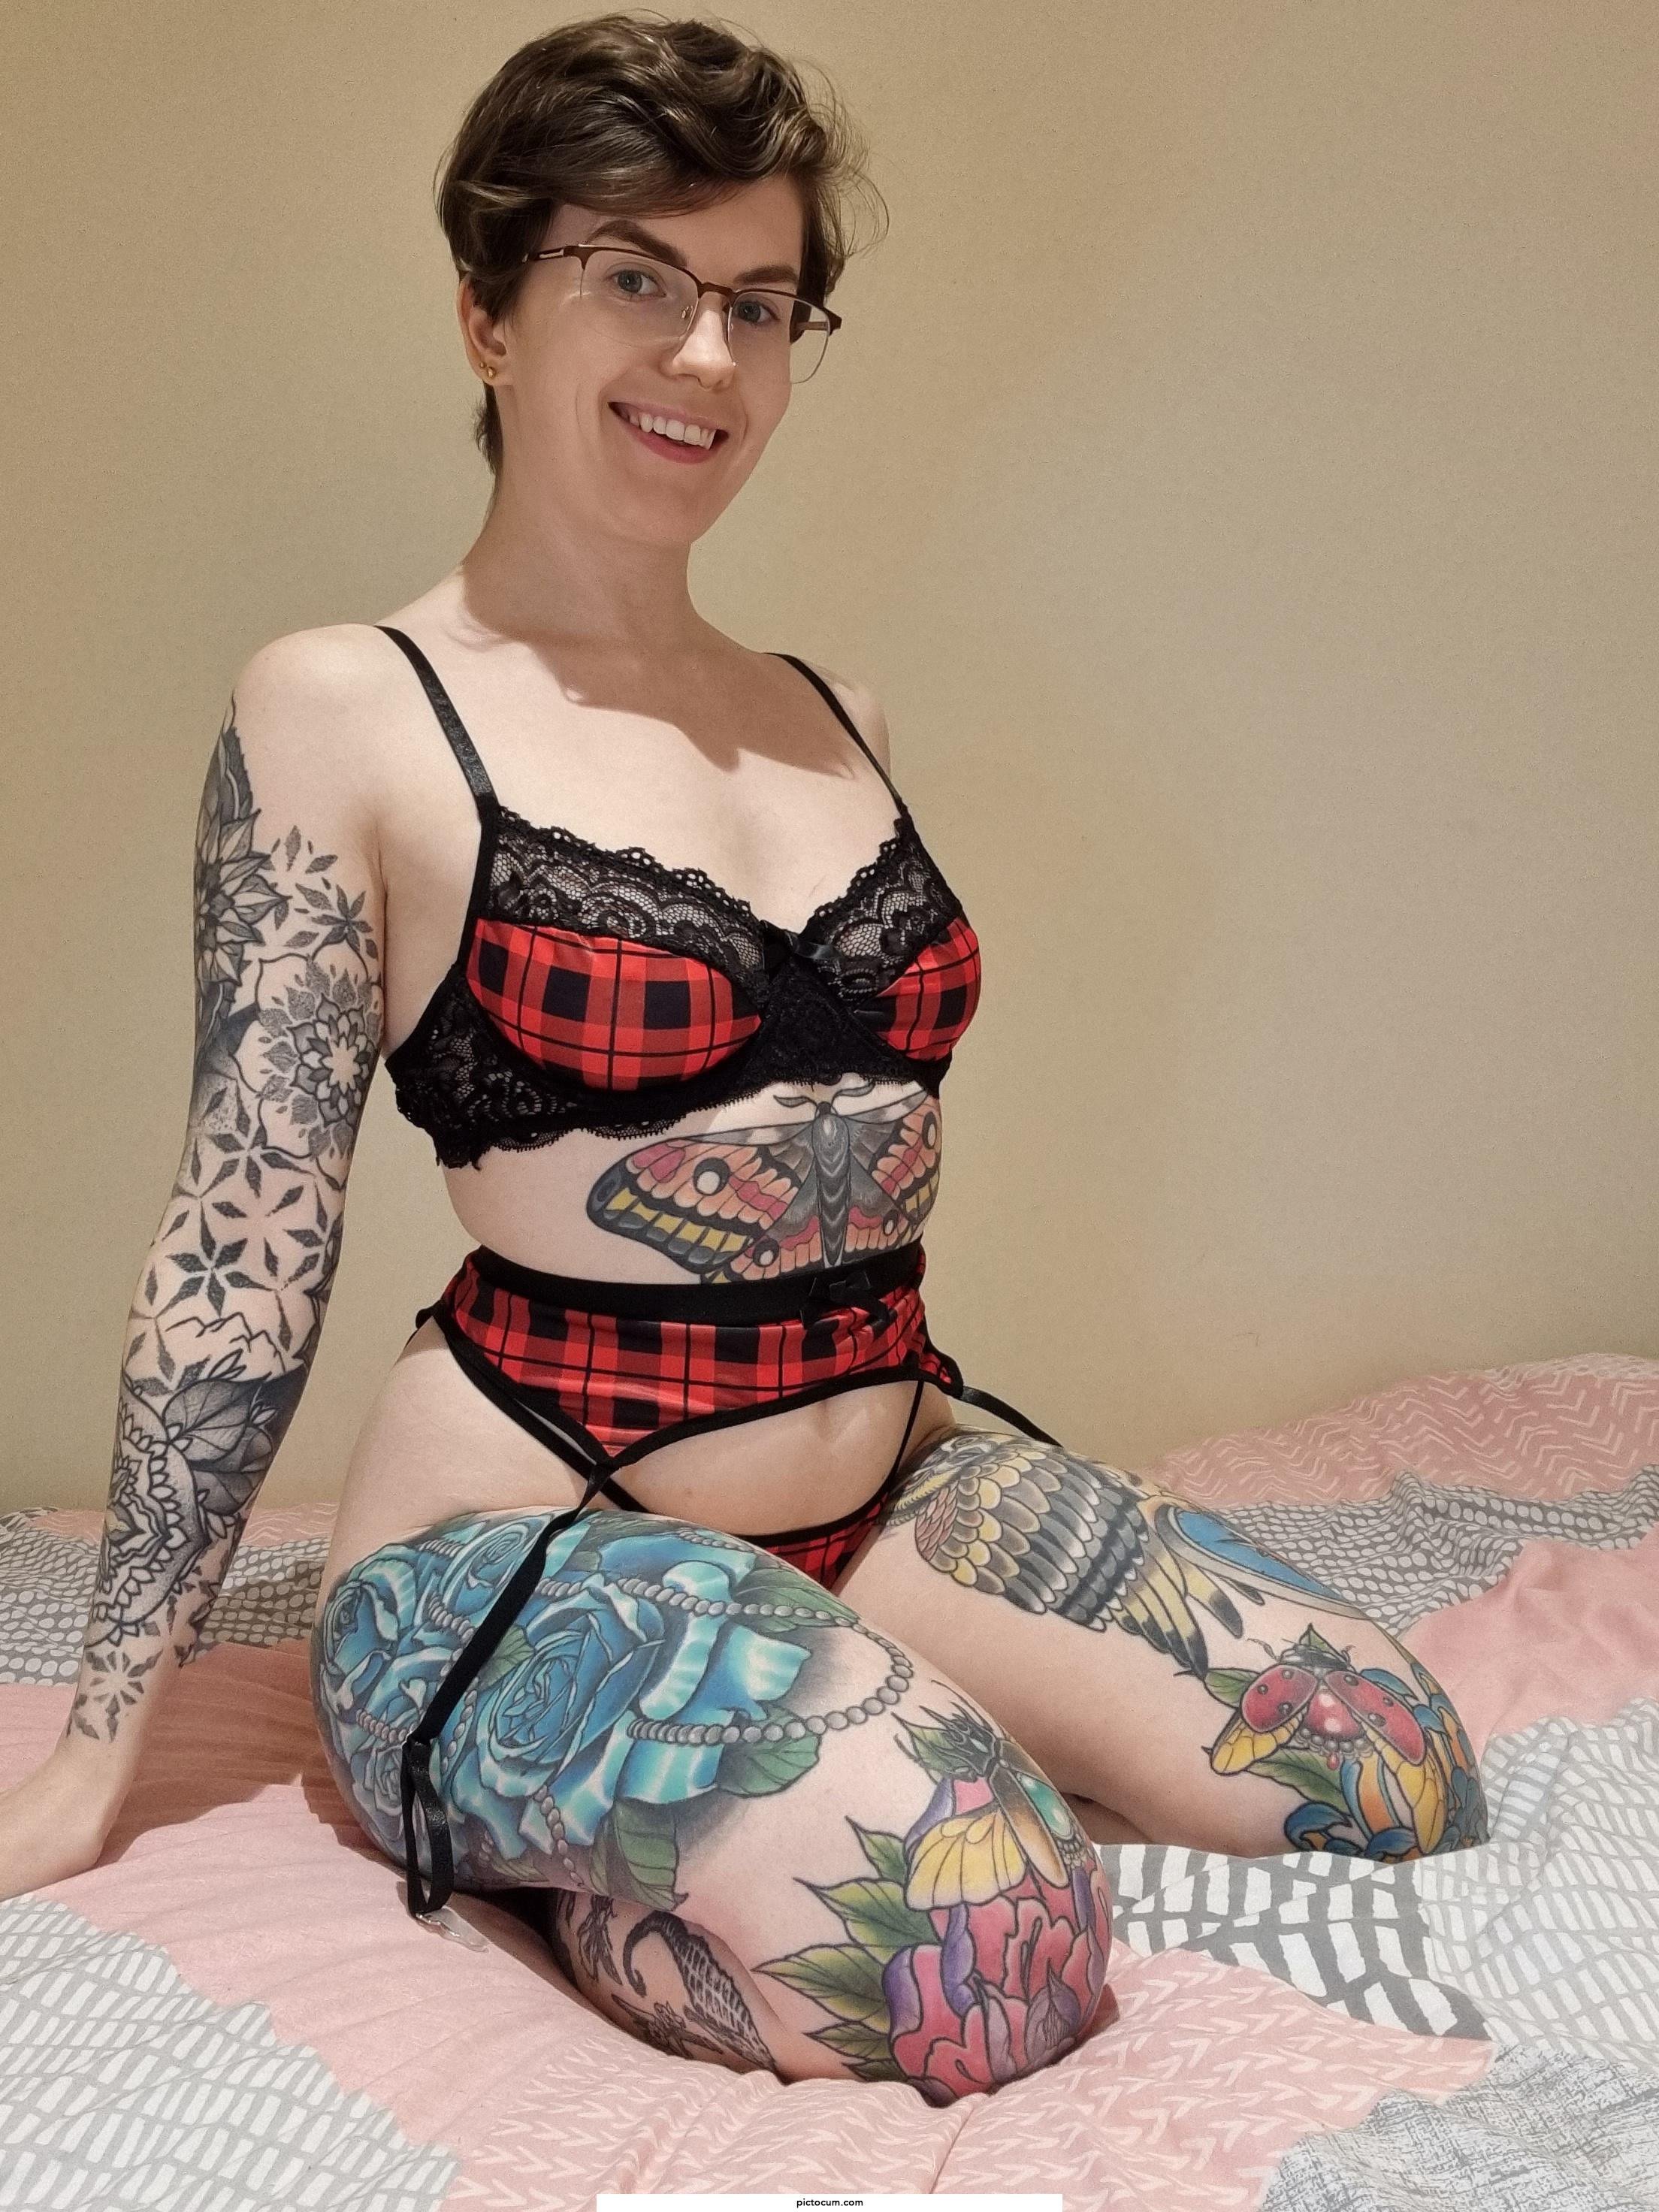 Do you find tattoos sexy?